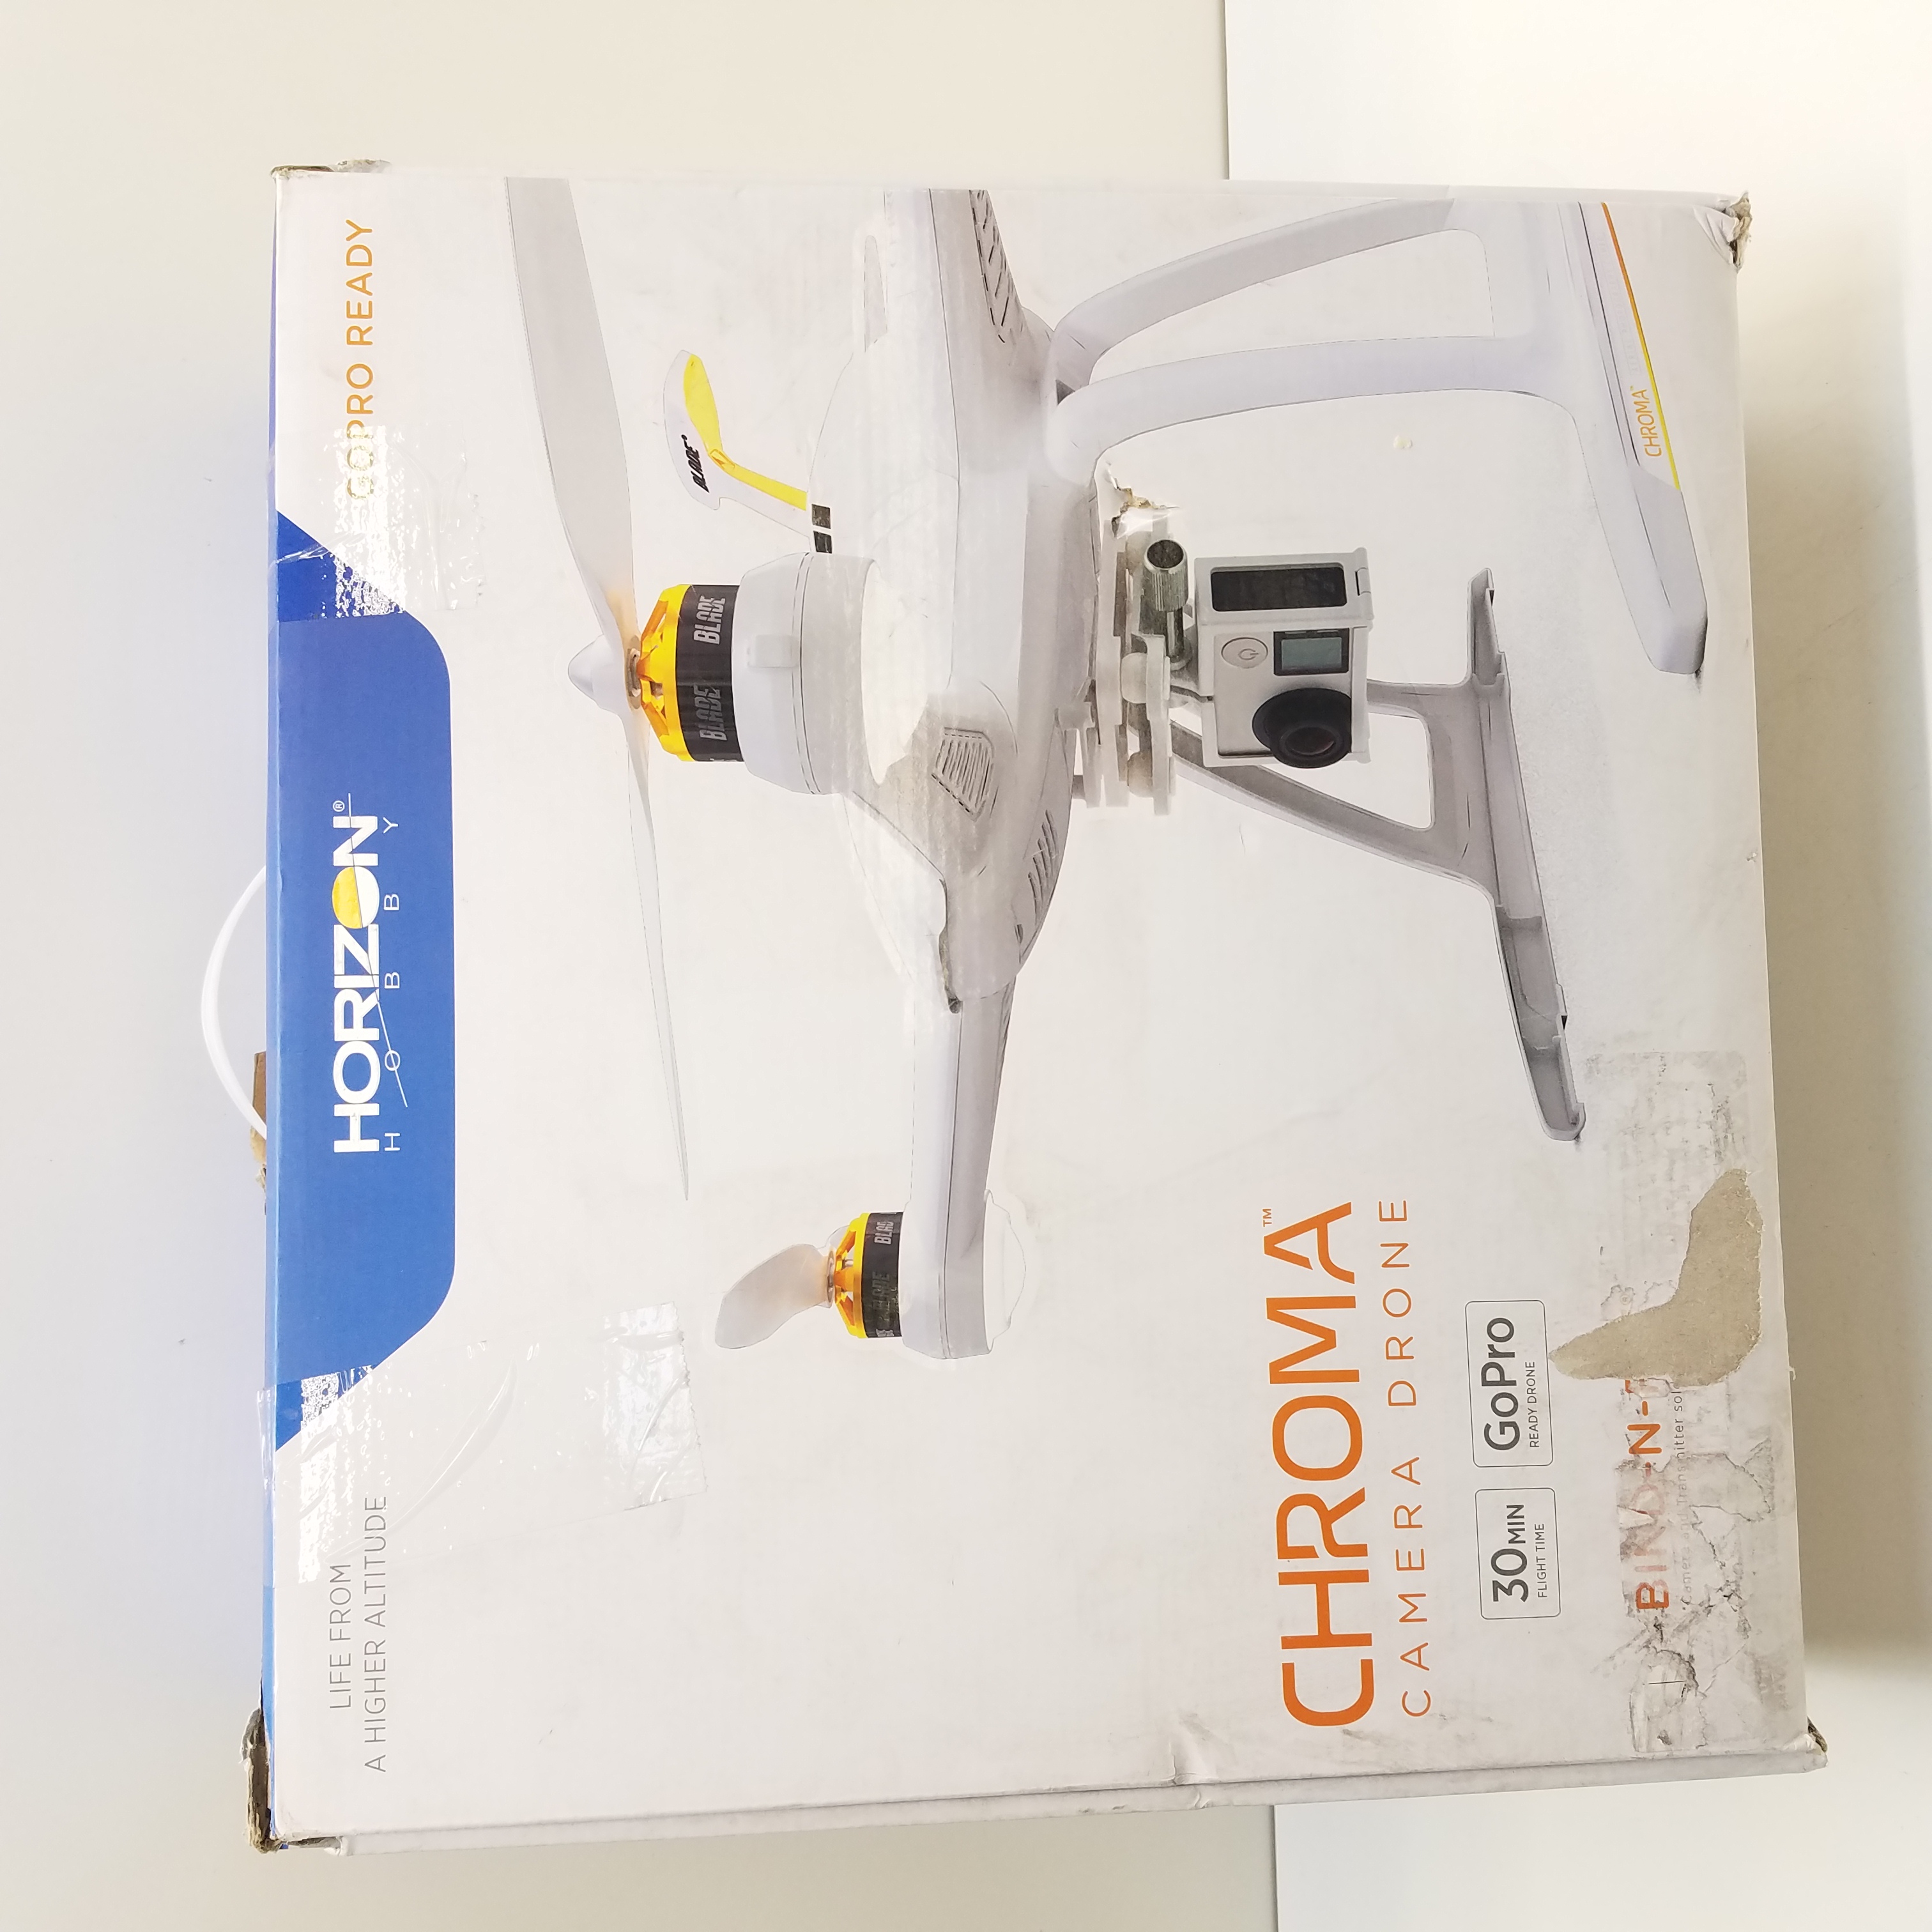 Buy the Horizon Chroma Drone | GoodwillFinds